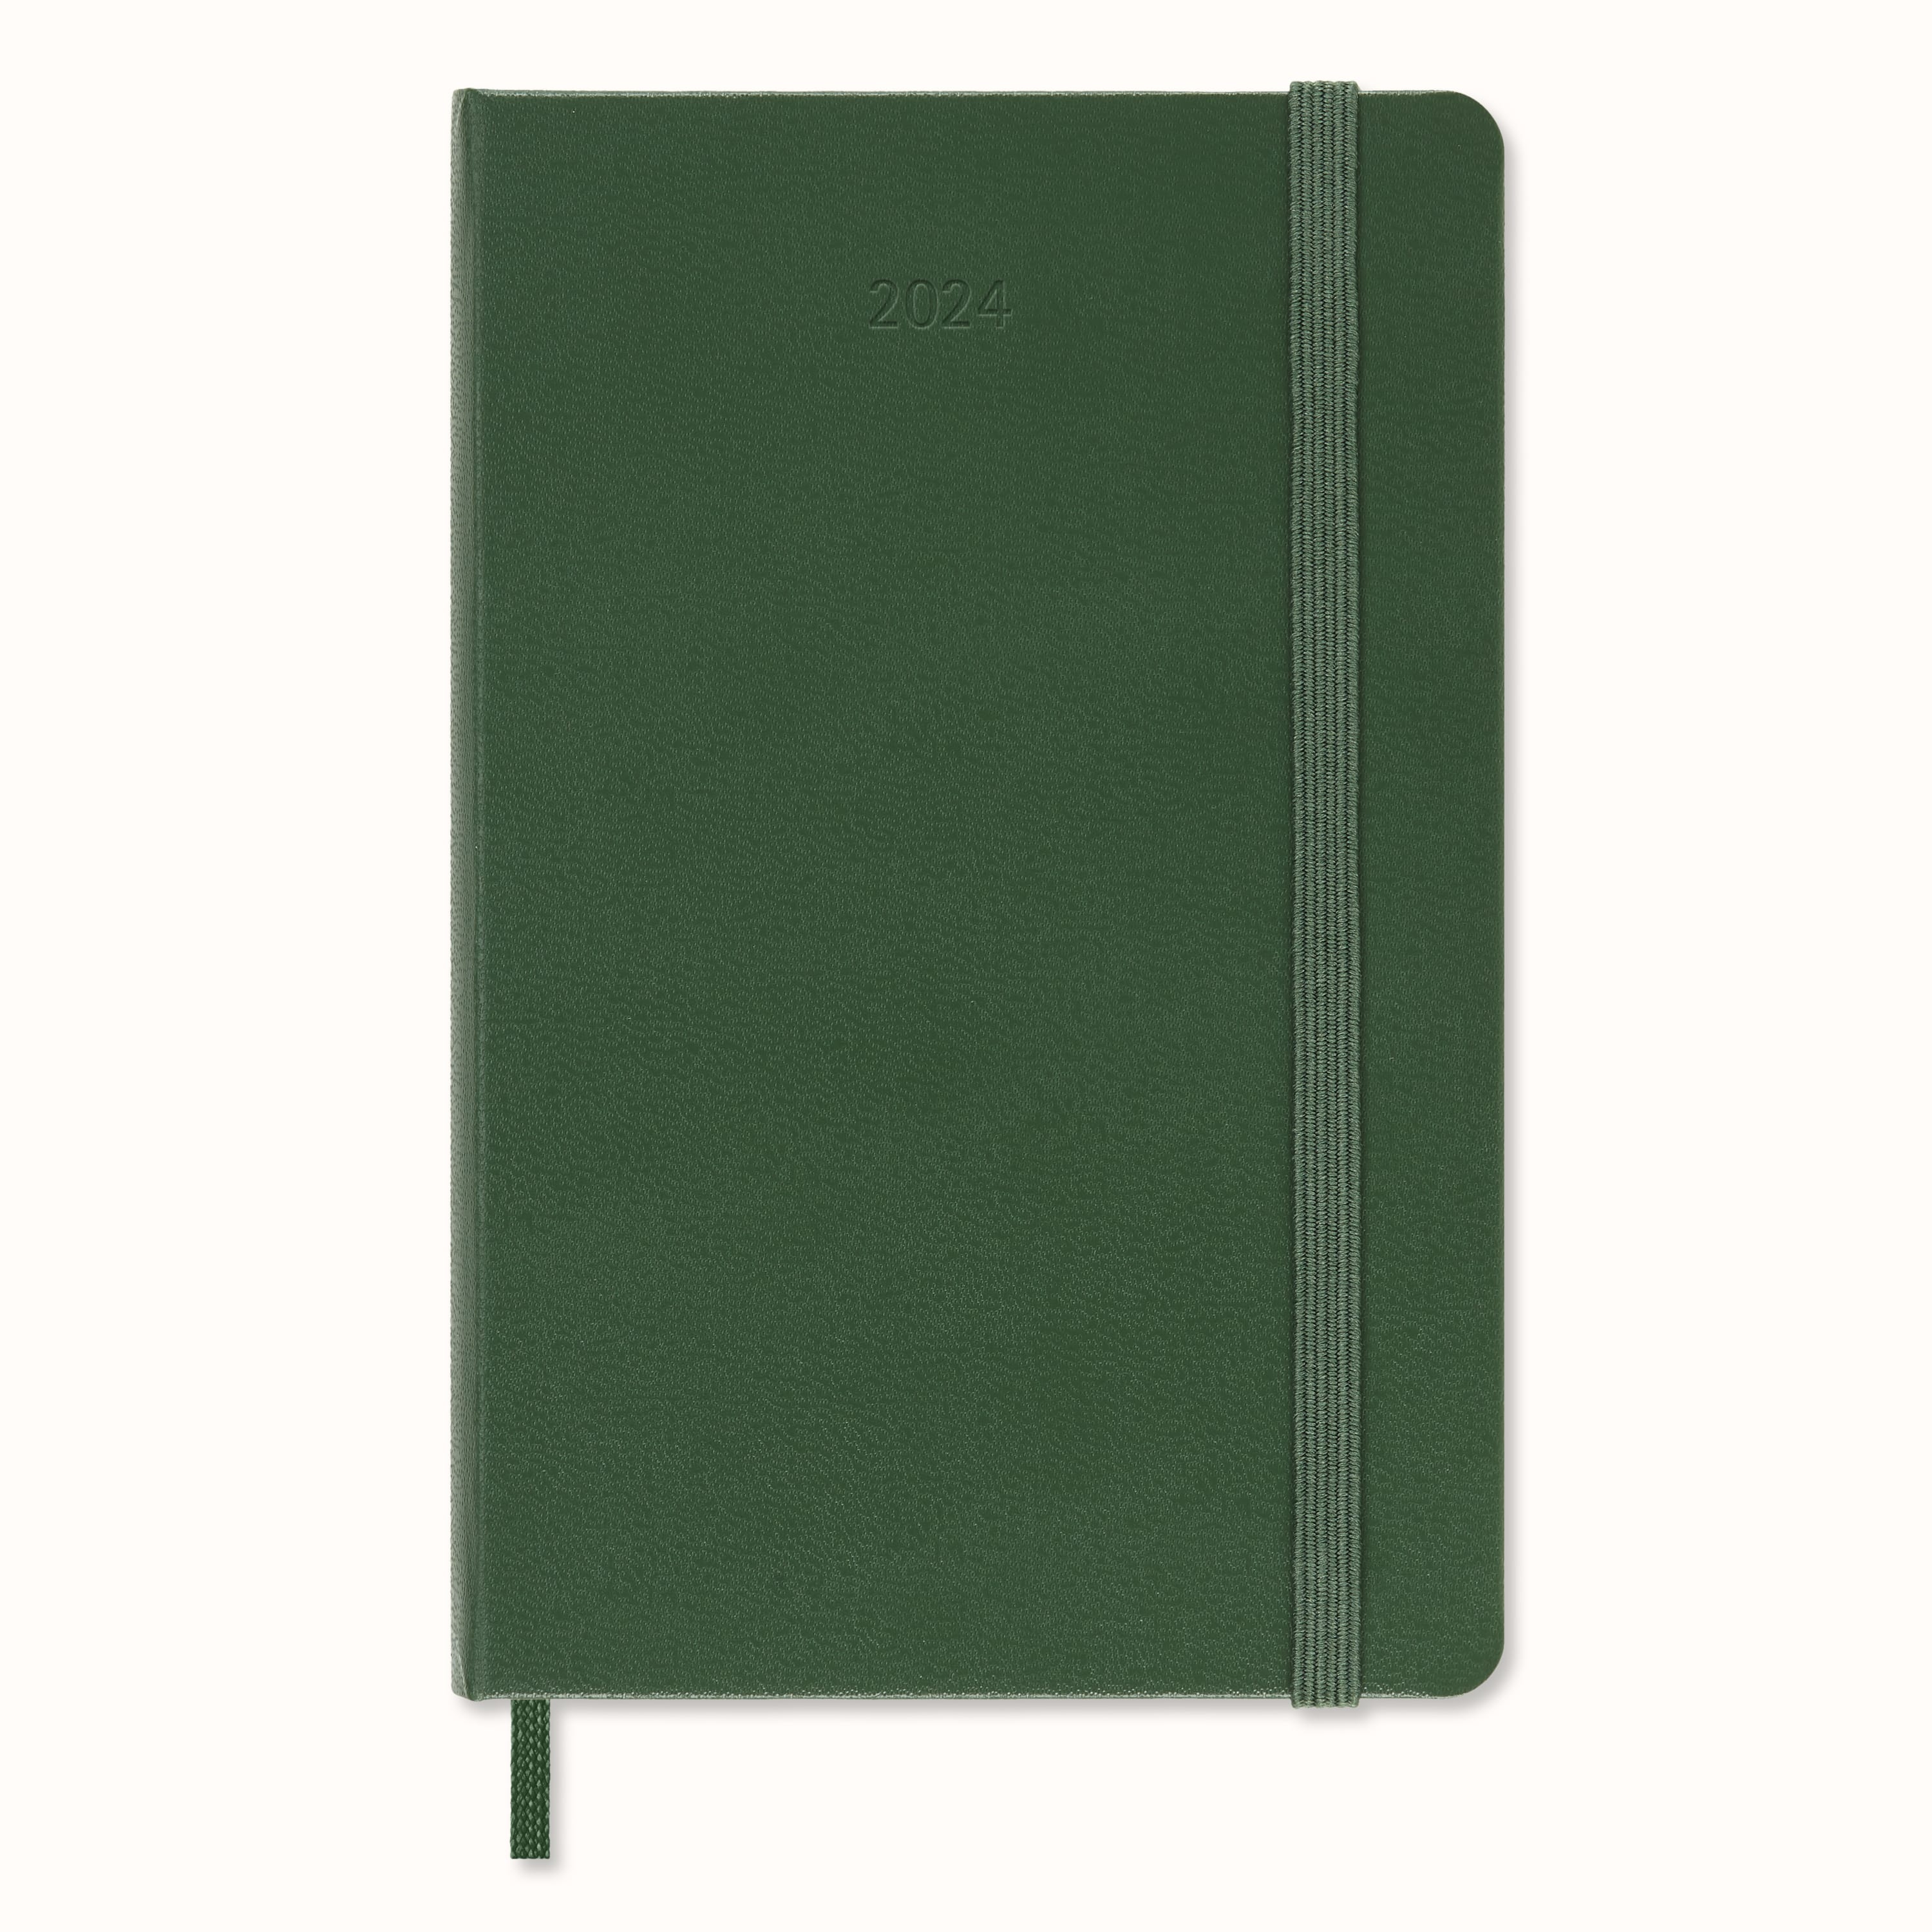 Snb Large Cahier Minimal Vertical 2 Days per Page 2023 / 2024 Printable  Daily Inserts for Traveler's Notebooks 